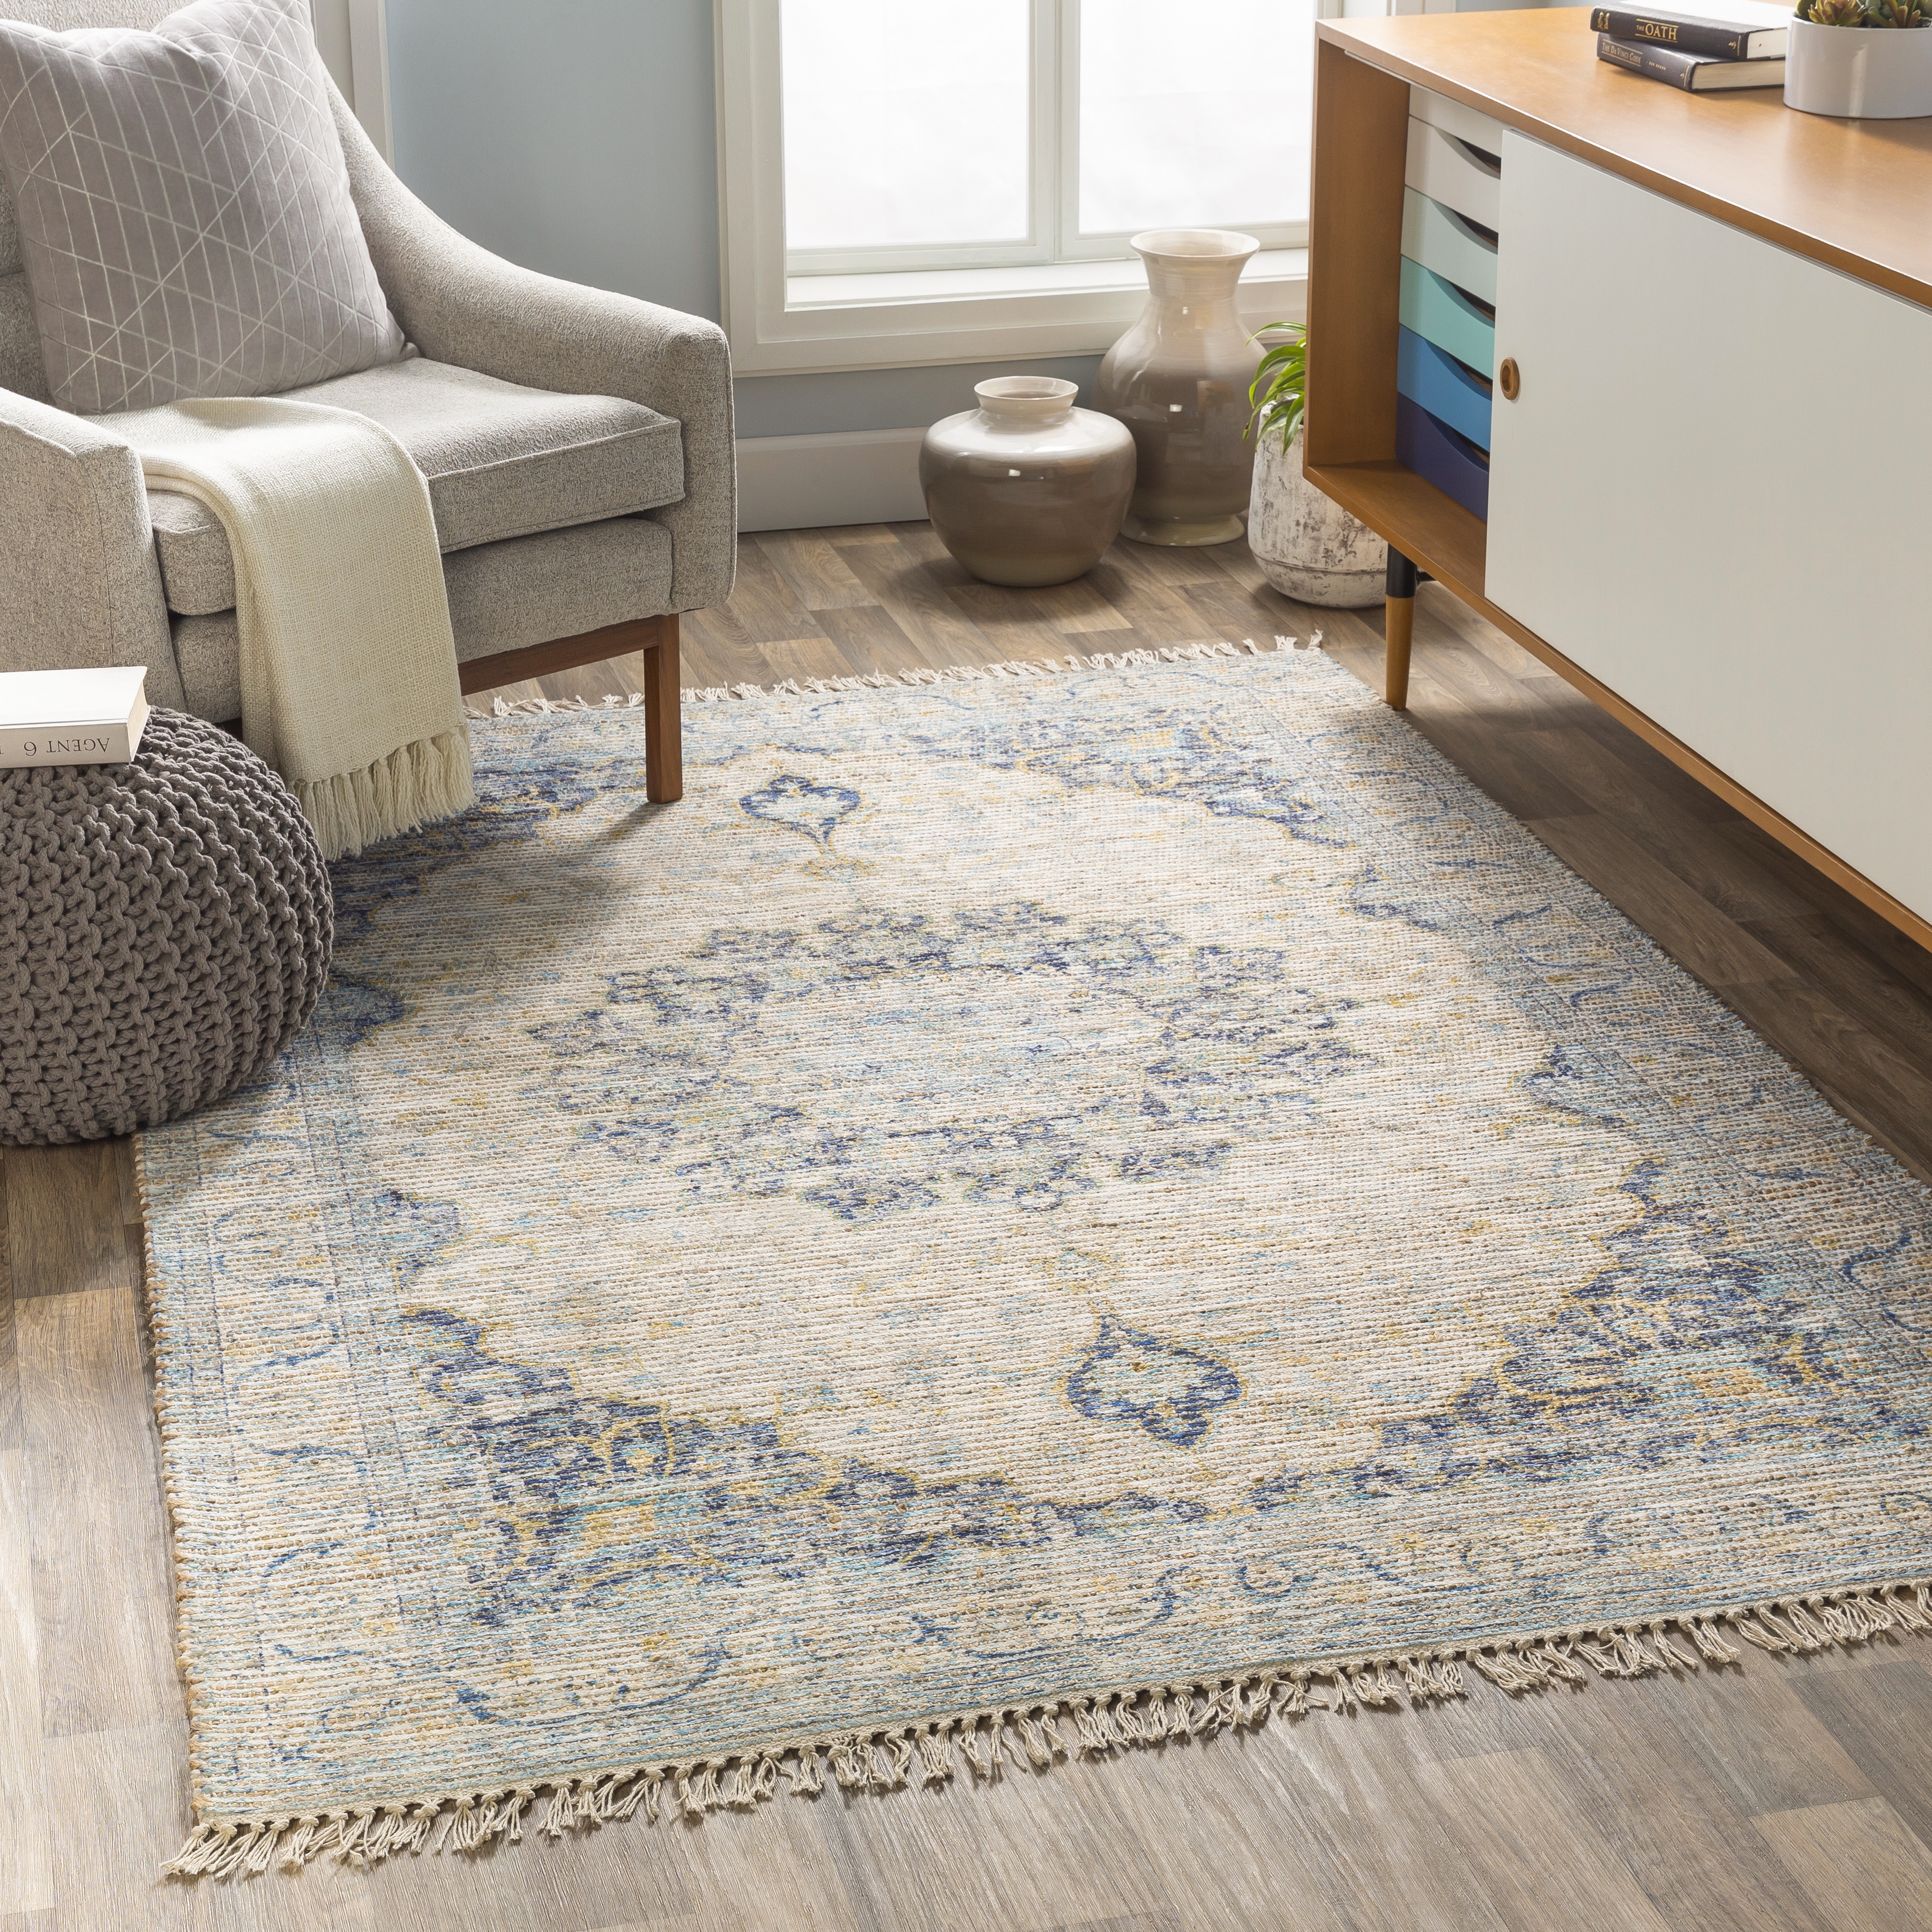 Coventry Rug, 8' x 10' - Image 1